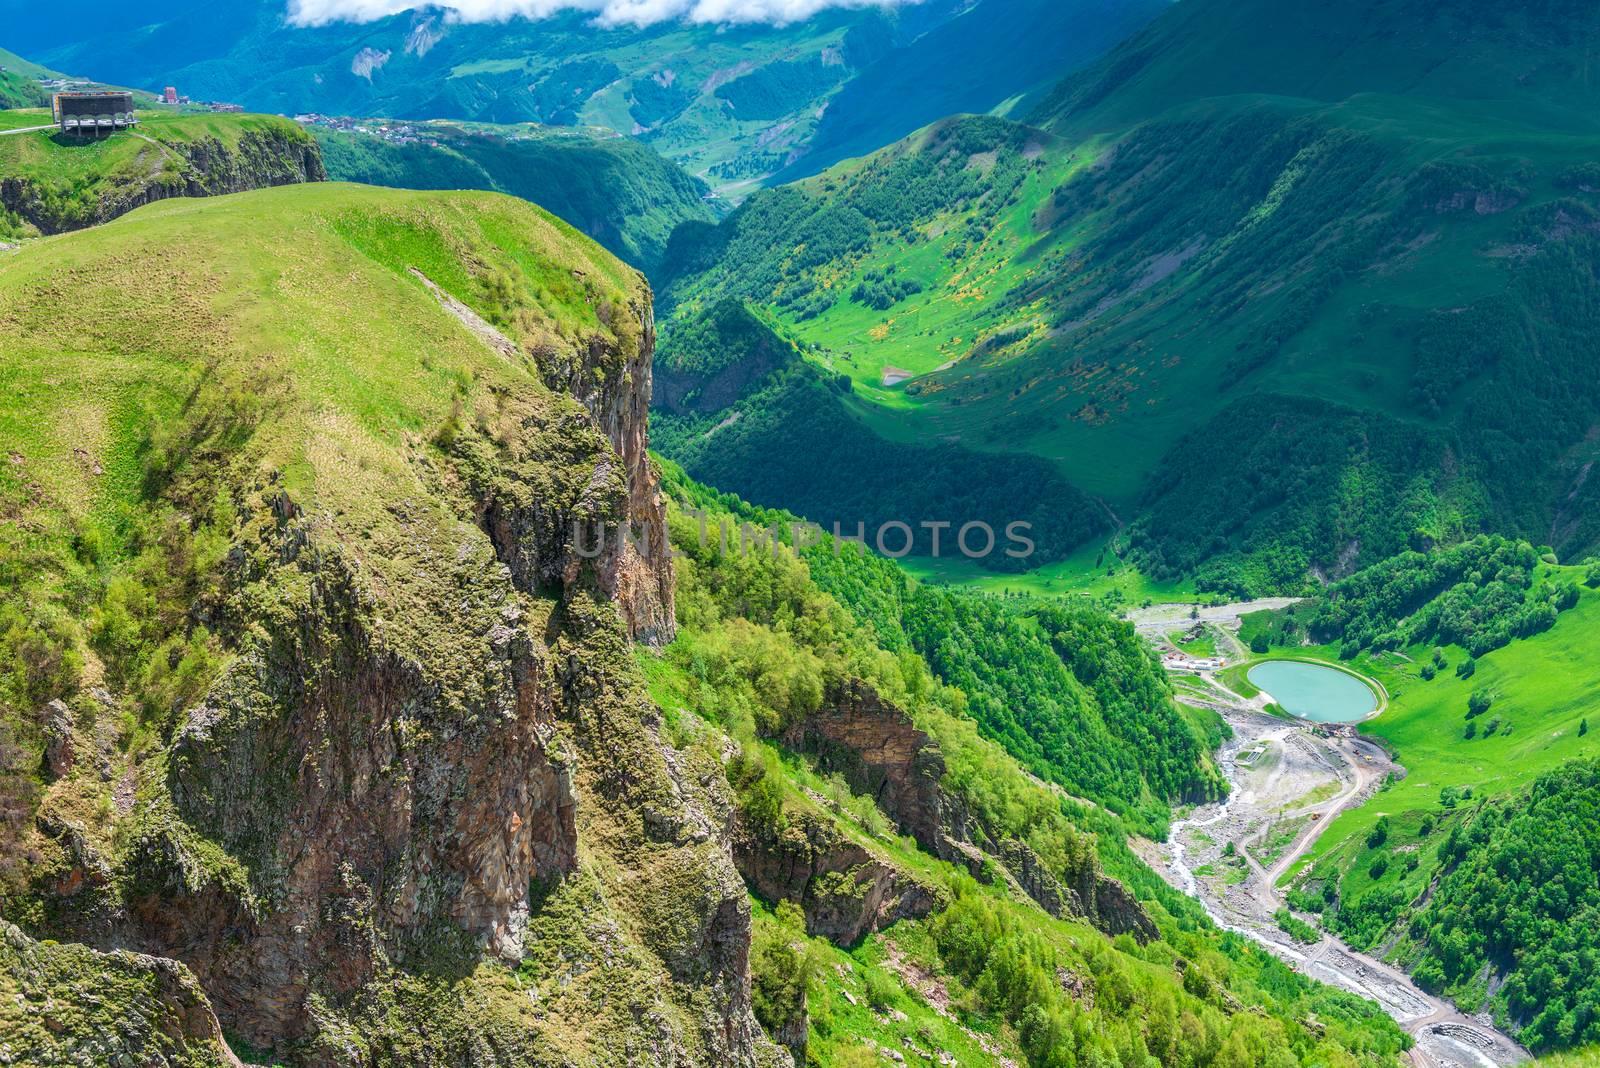 View of the gorge from a high point of view, Caucasus, Georgia by kosmsos111